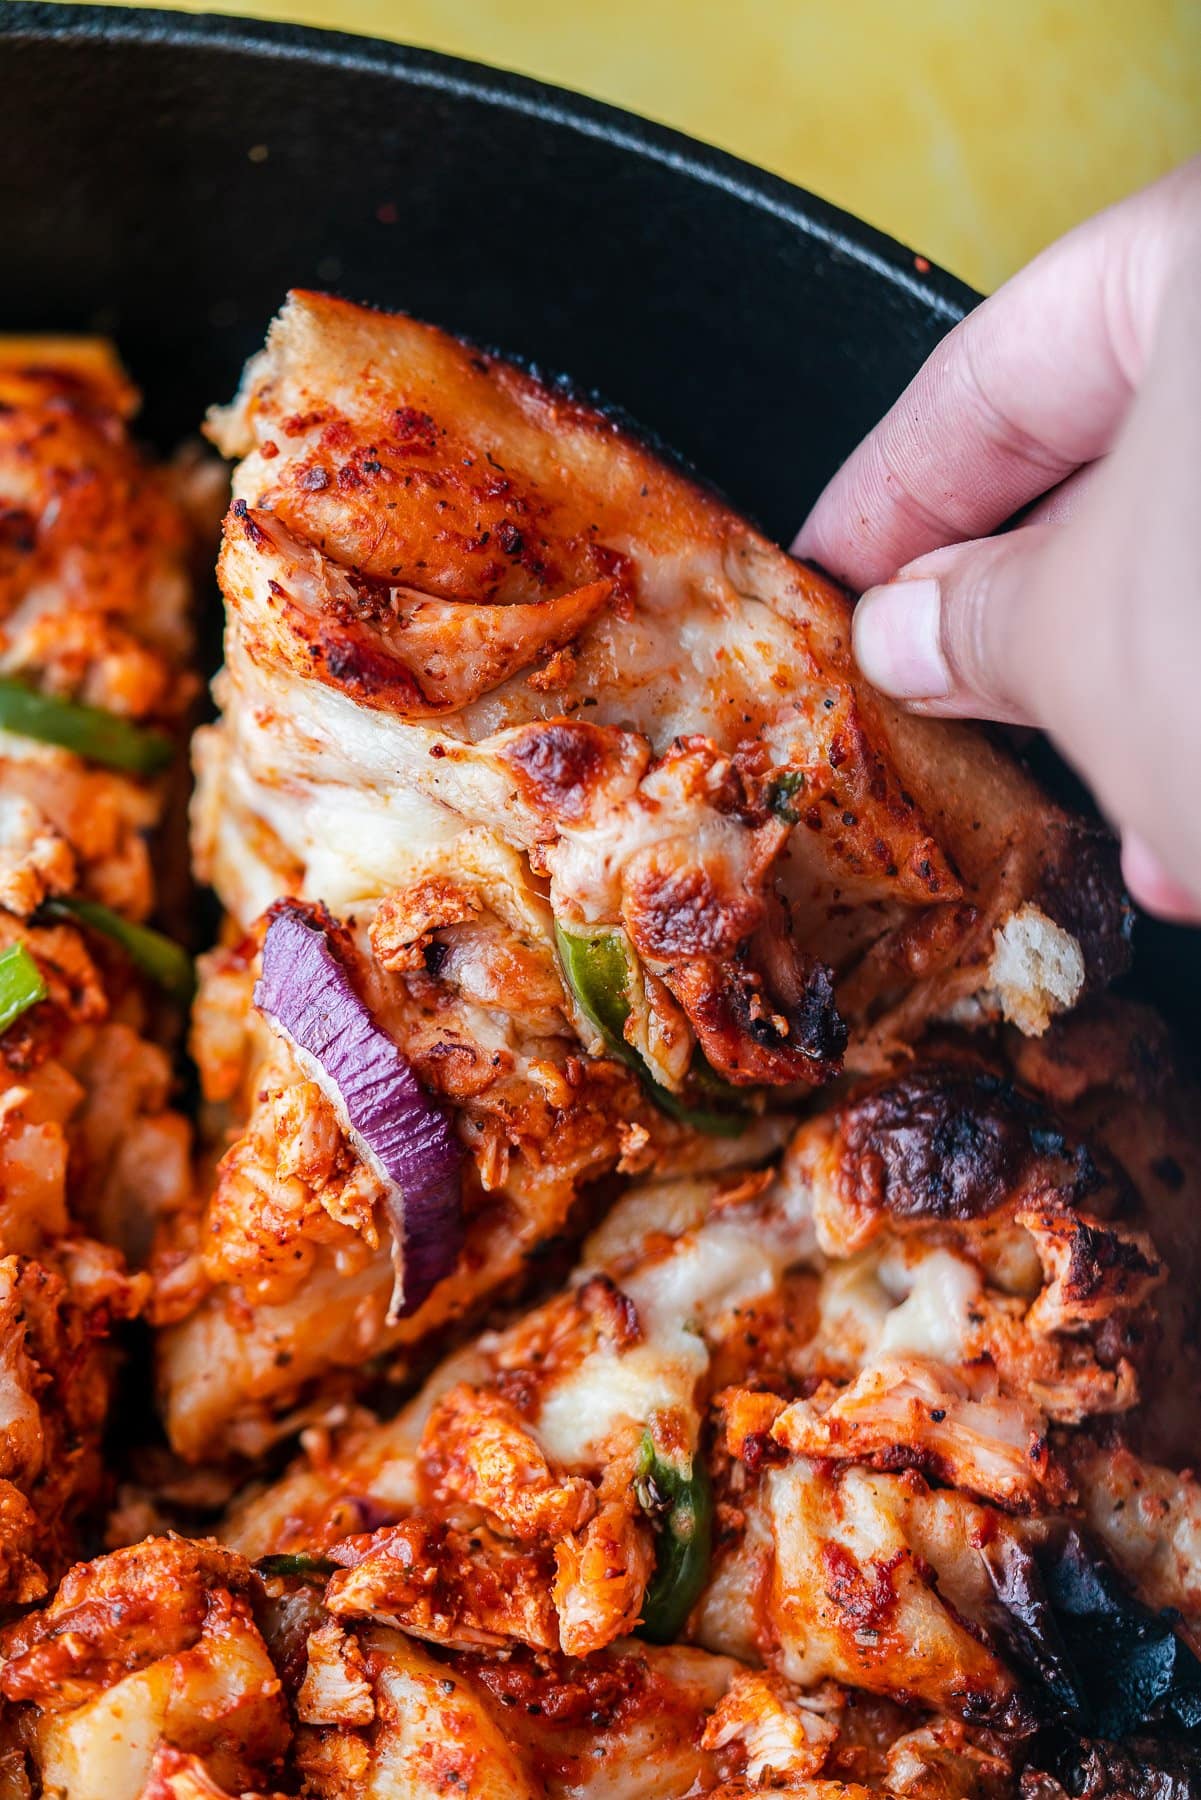 a hand grabbing a slice of tandoori chicken pizza from the skillet